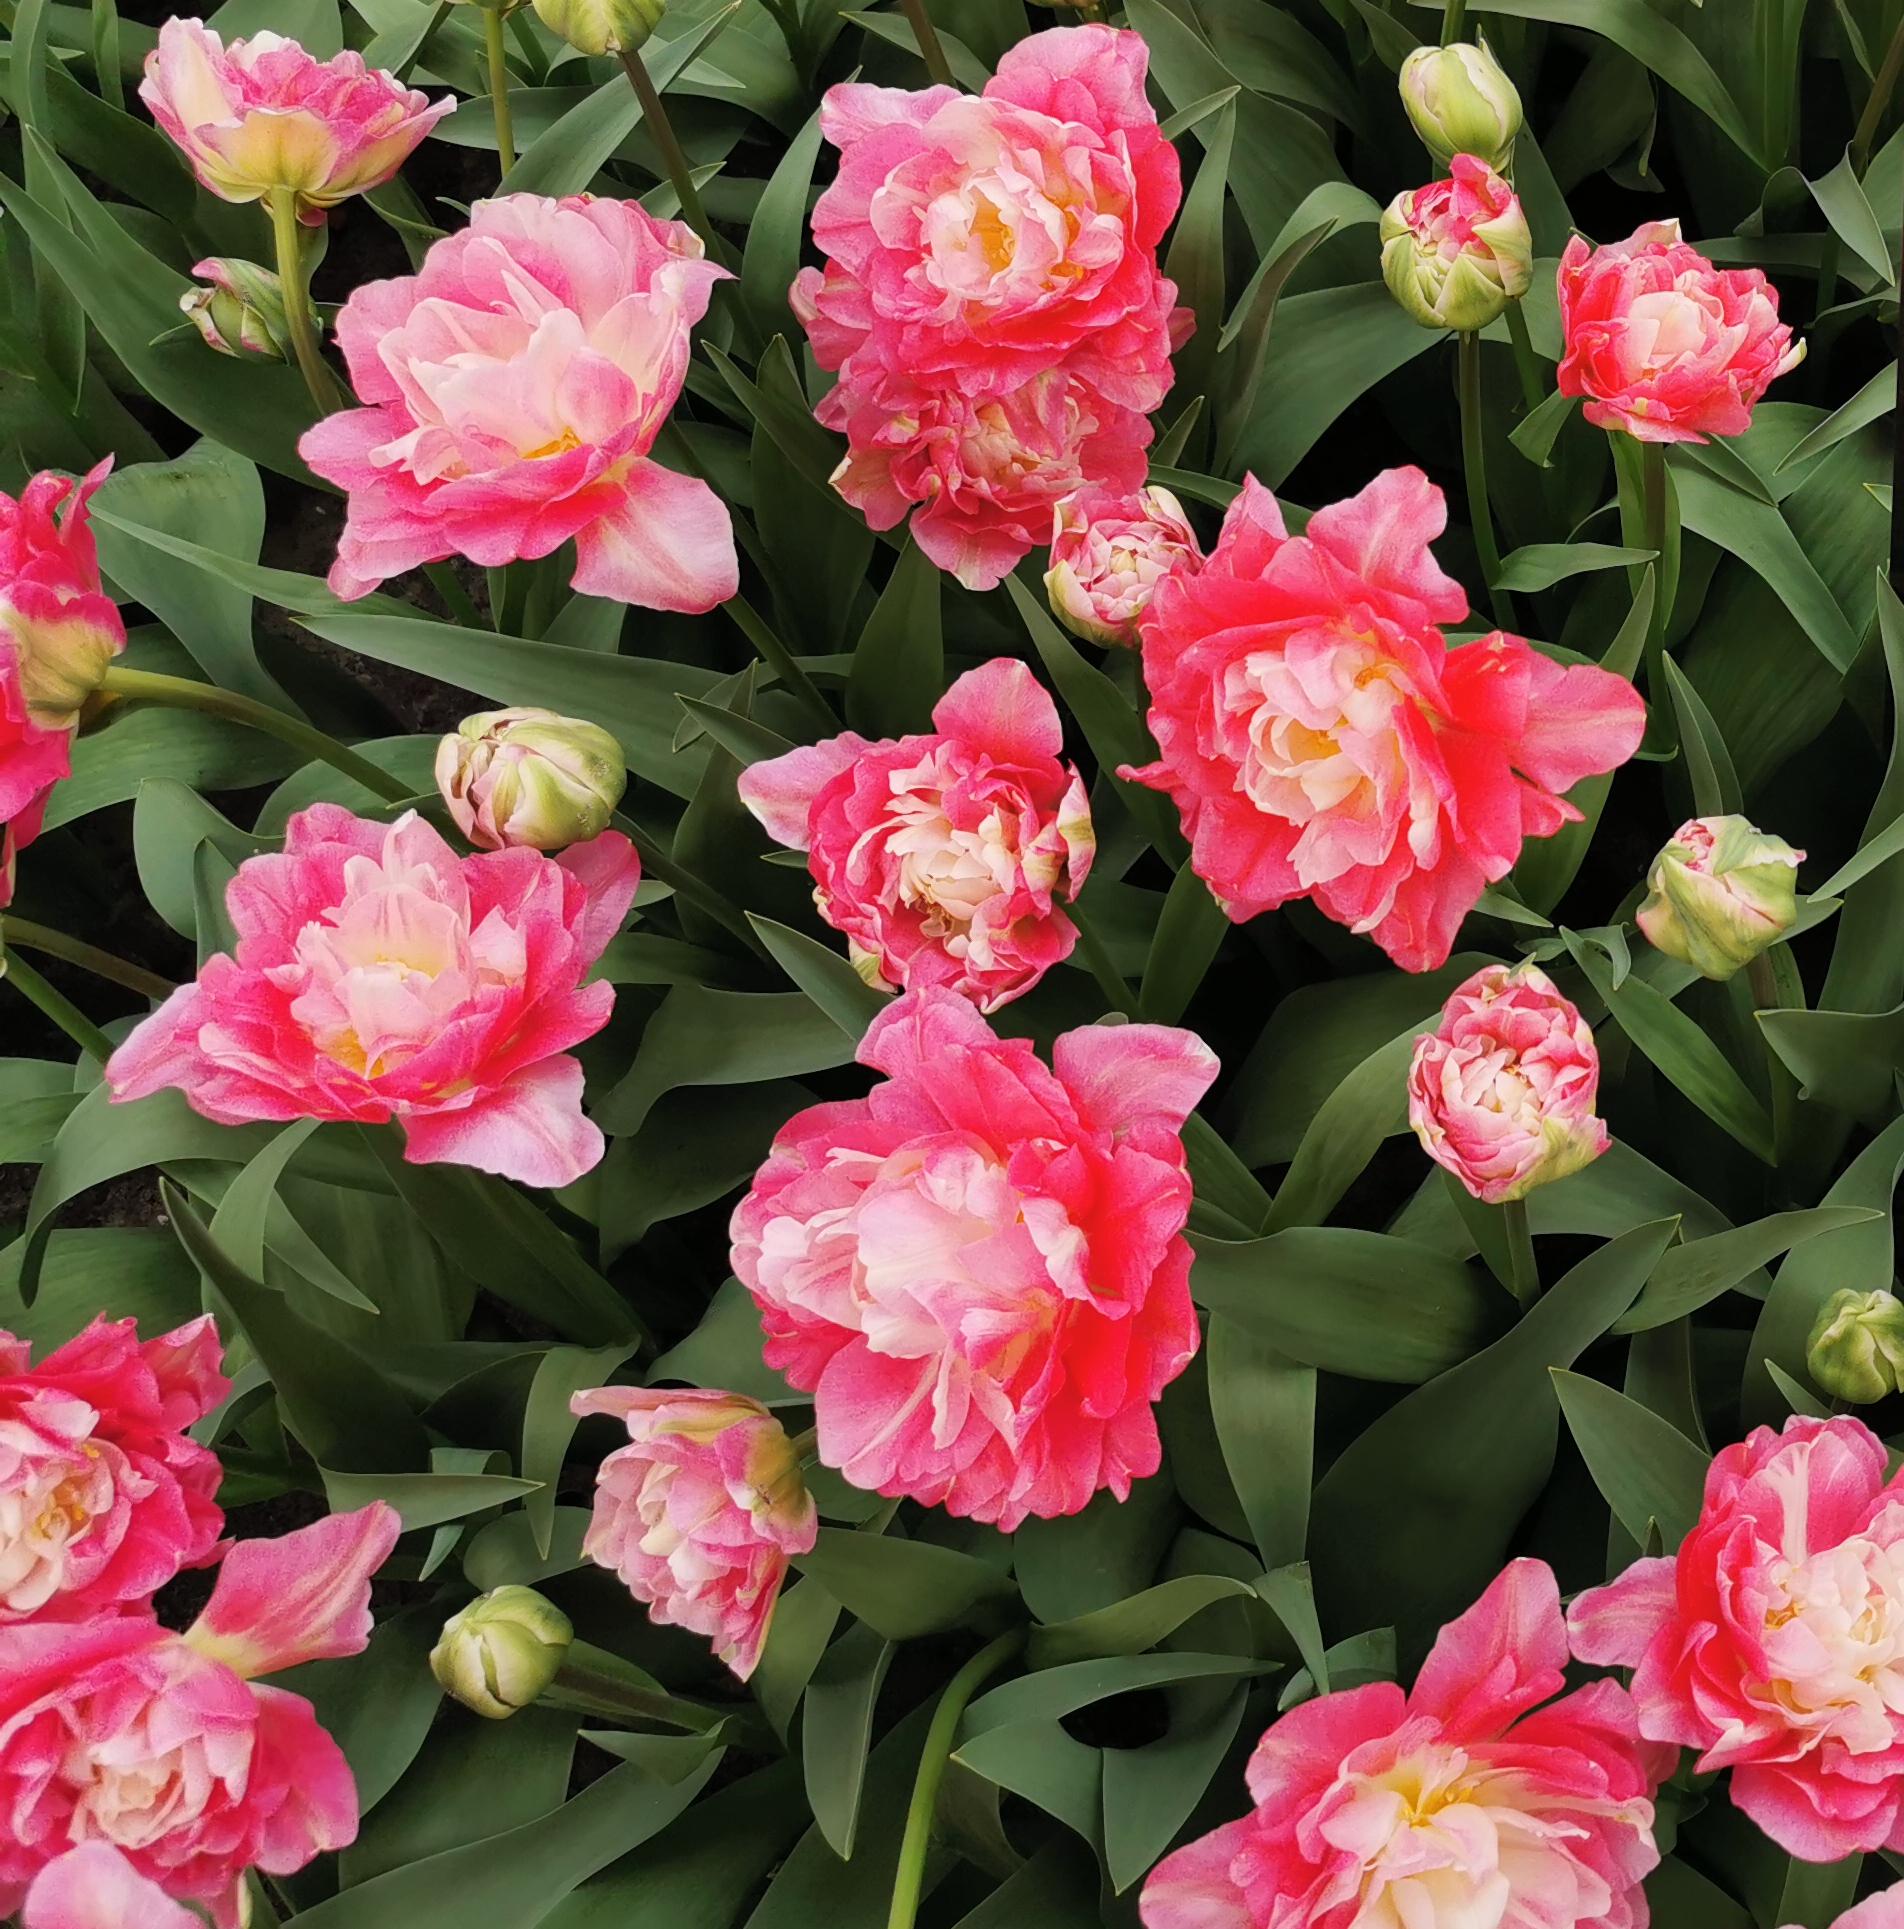 Tulip Double Late 'Double Sugar' - Tulip (Shipping begins Fall 2020) from Leo Berbee Bulb Company